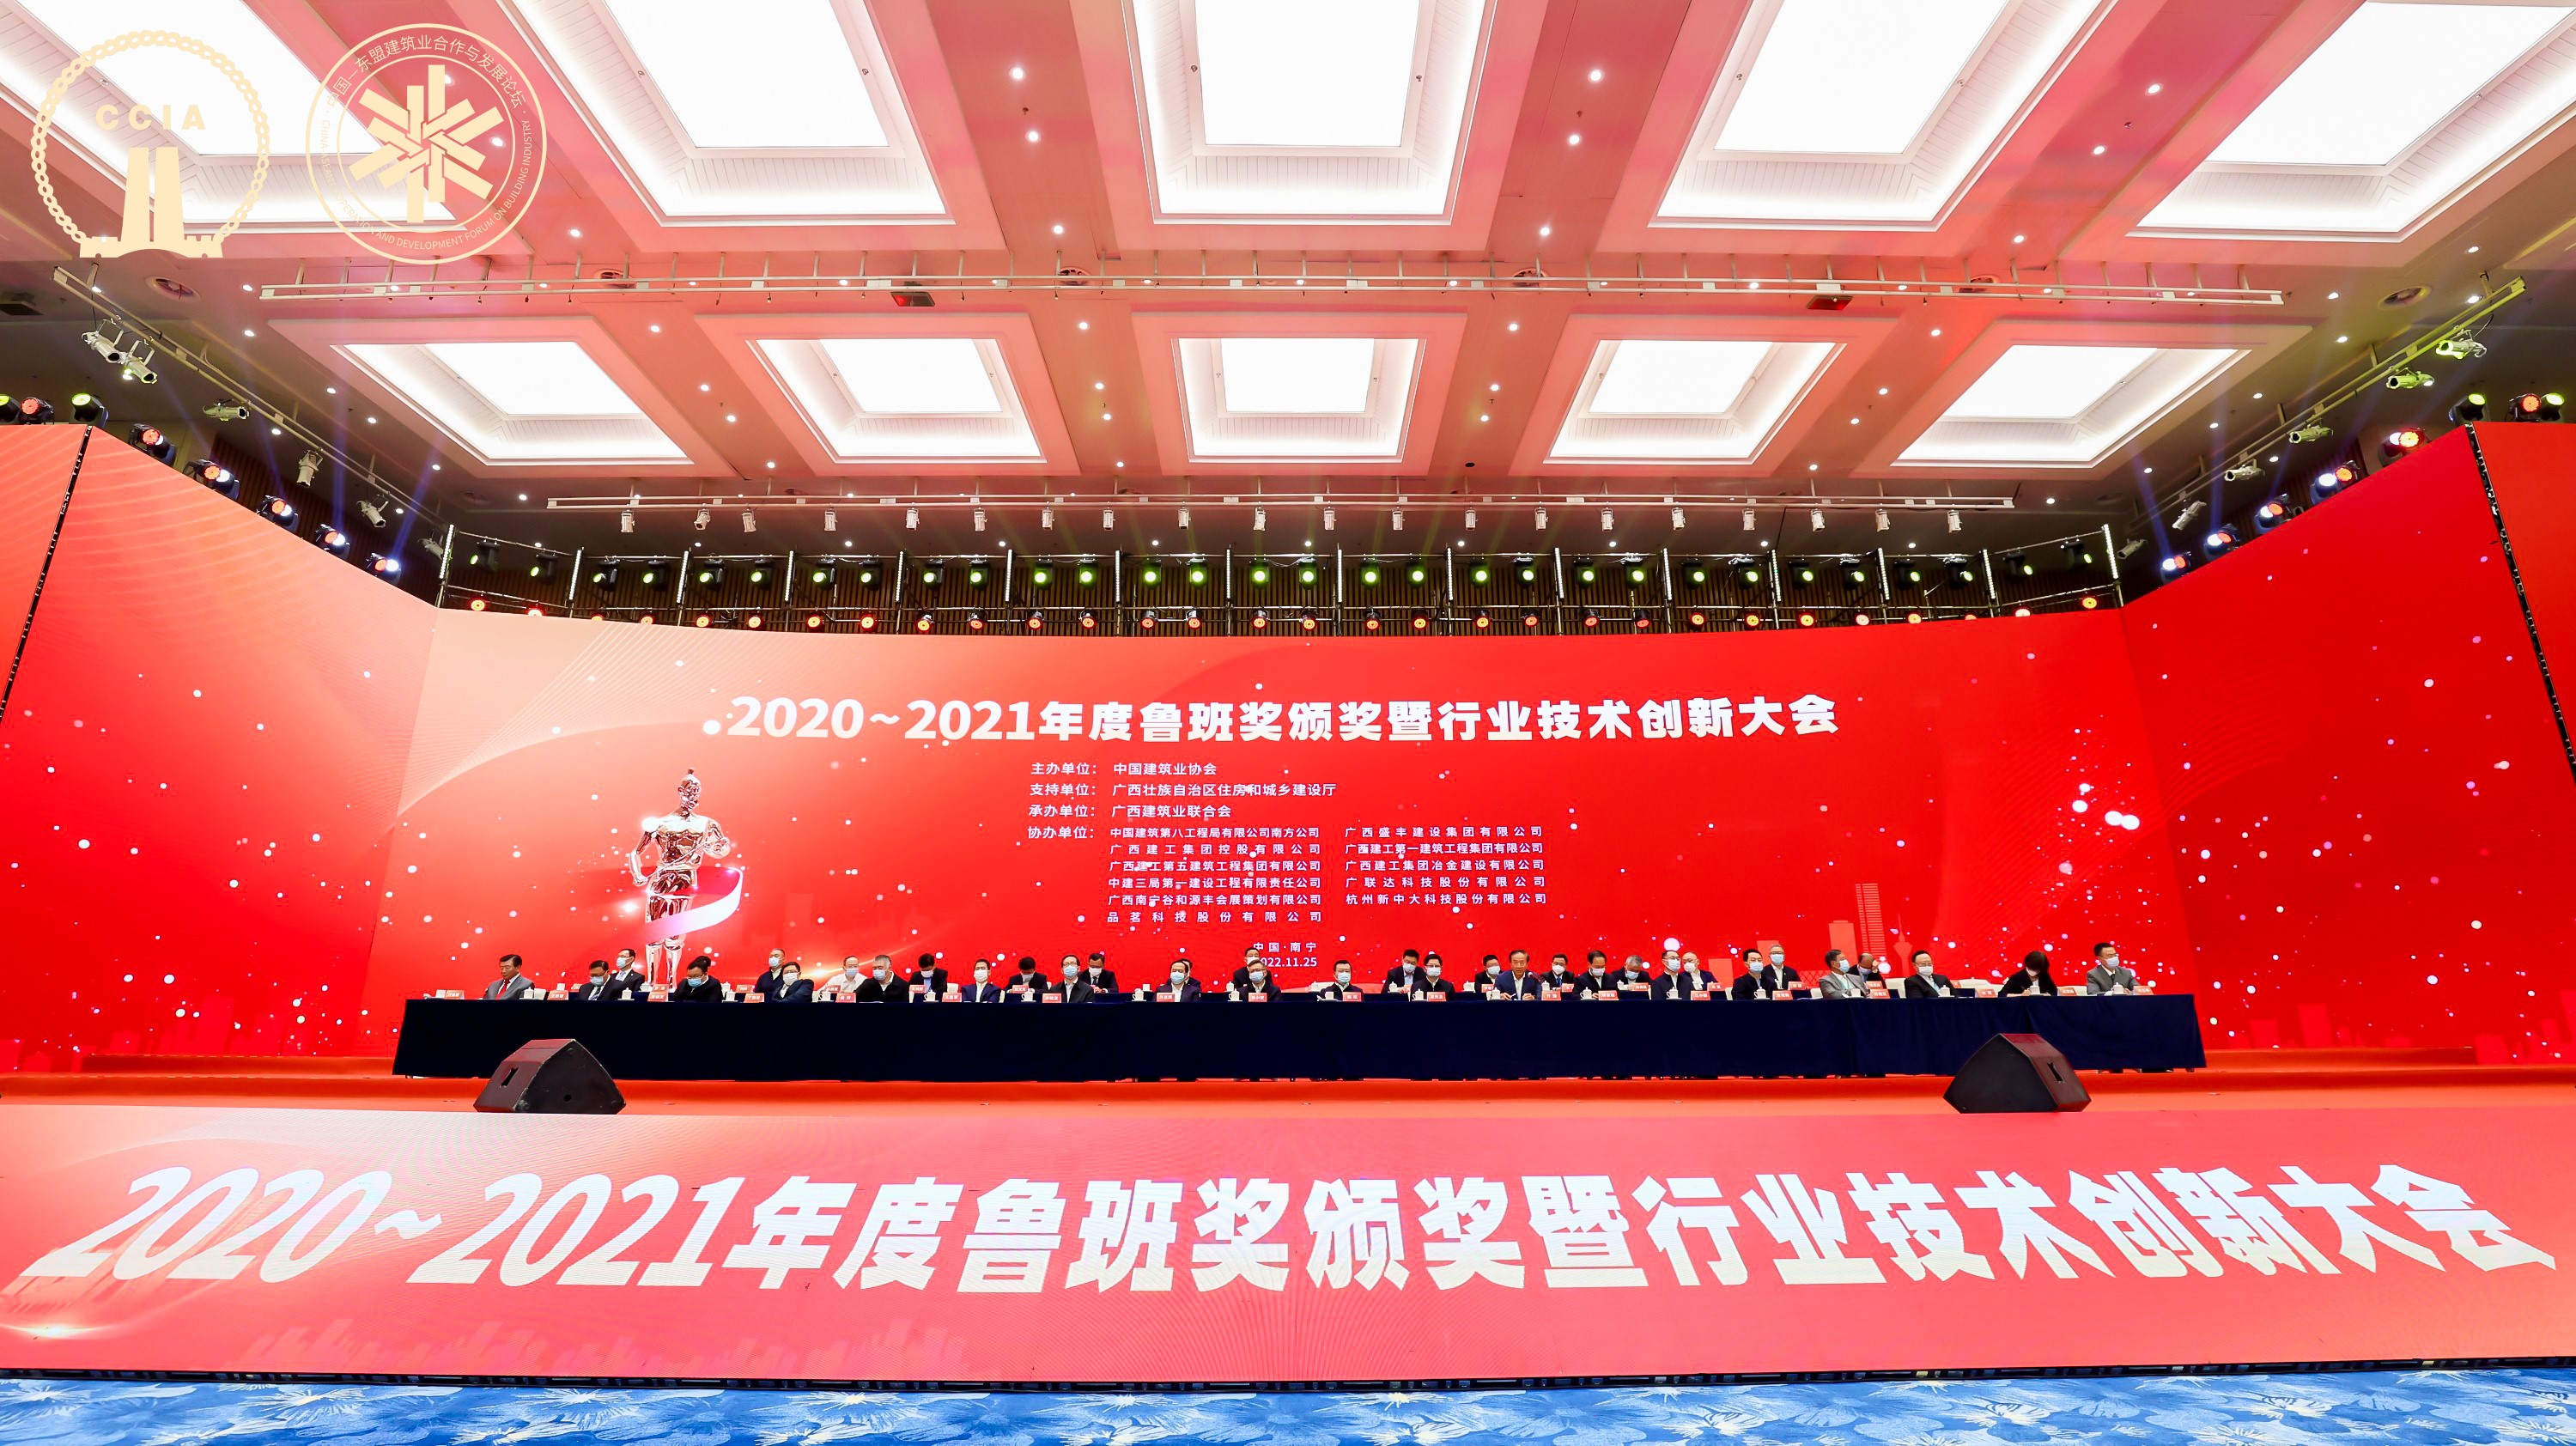 Shandong Hi-speed Dejian Group Rewarded  Two Luban Award Trophies-The Highest Award in Construction Industry in China